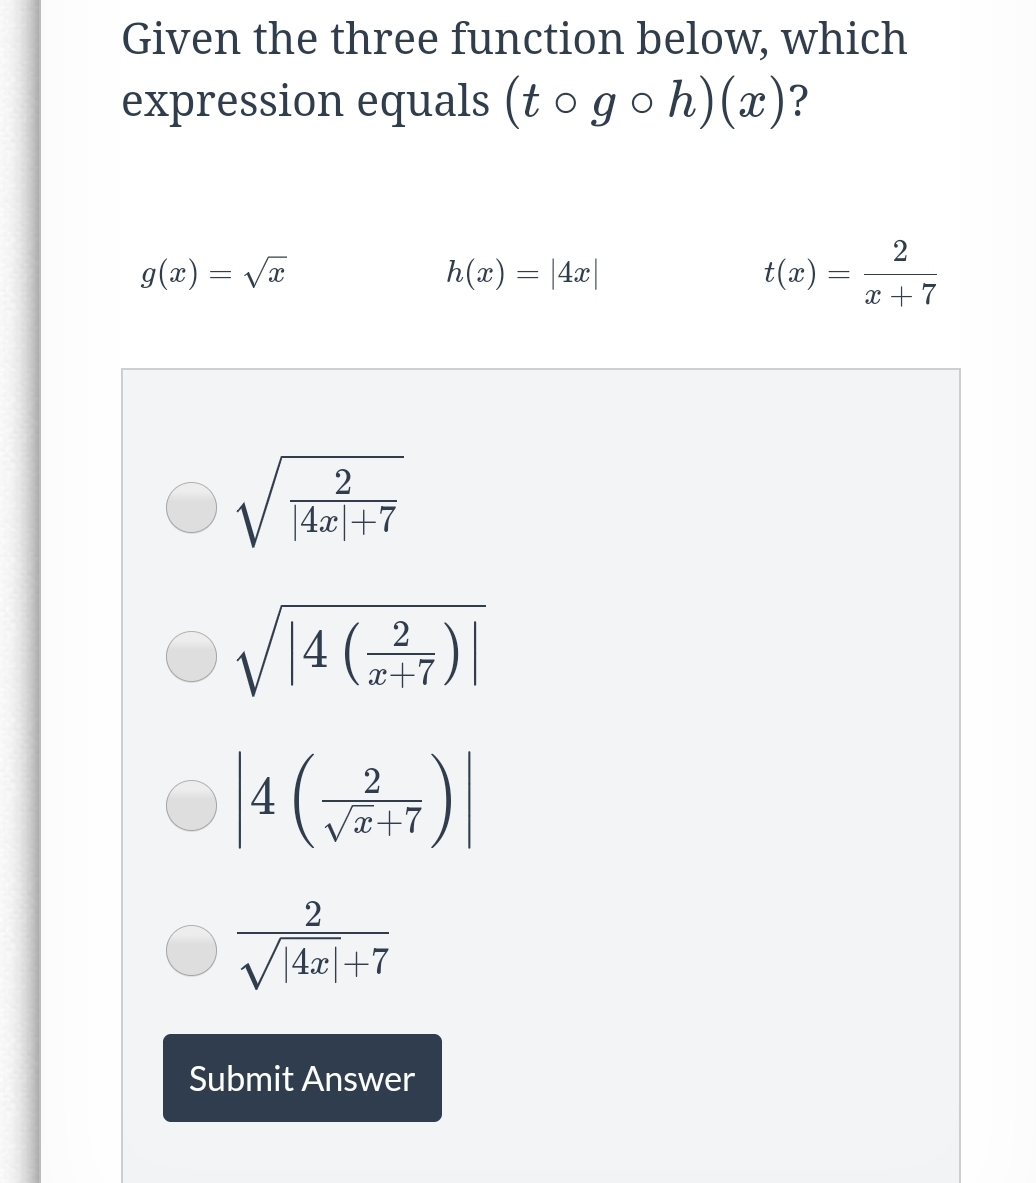 Given the three function below, which
expression equals (t o go h)(x)?
g(x) = Vx
h(x) = |4x|
(æ)7
x + 7
V 14.r|+7
V1
4 ()|
2
x+7
2
4
L+x^
2
V14.x|+7
Submit Answer
